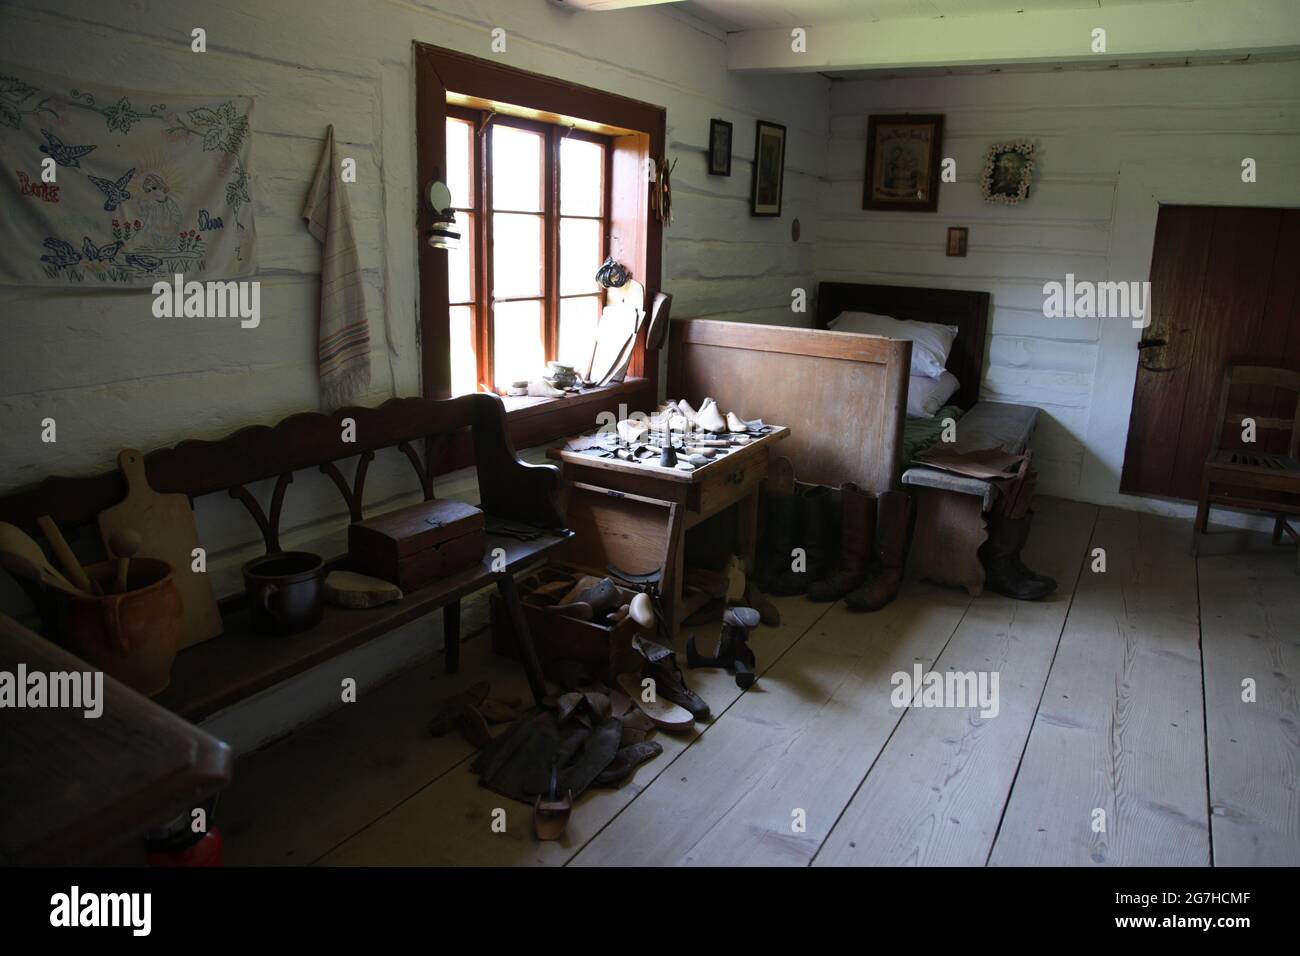 Open-air museum in Tokarnia, interion of a country cottage, Tokarnia, rural architecture, Stock Photo